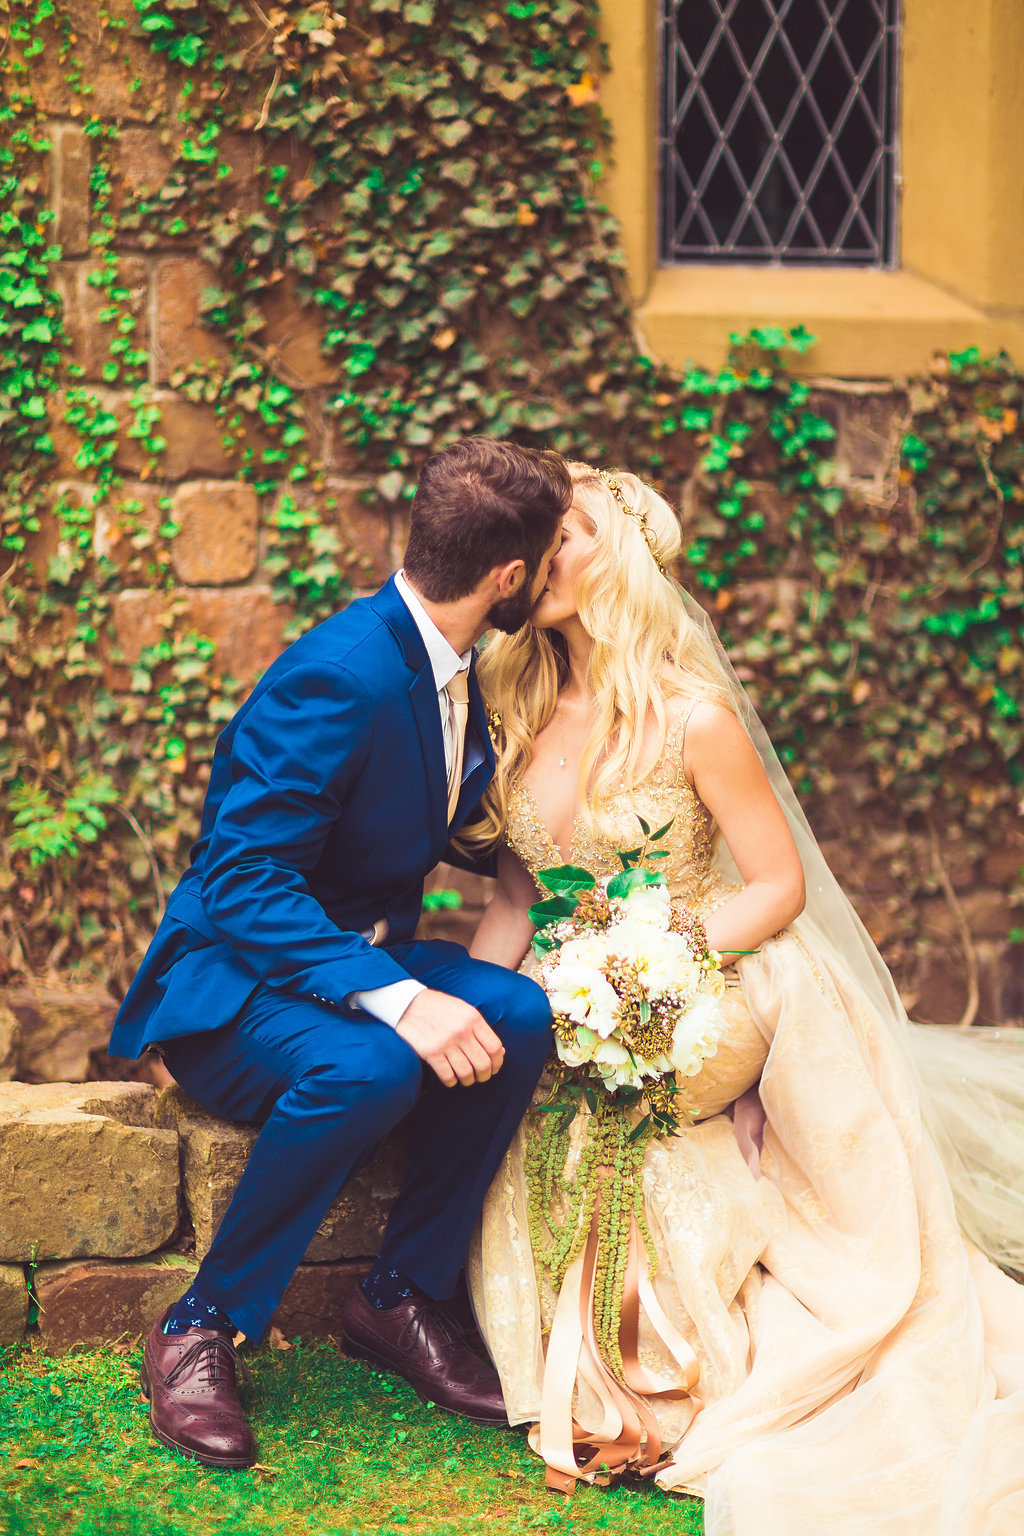 Wedding Photograph Of Bride in Her Dress and Groom in His Blue Suit Kissing Los Angeles